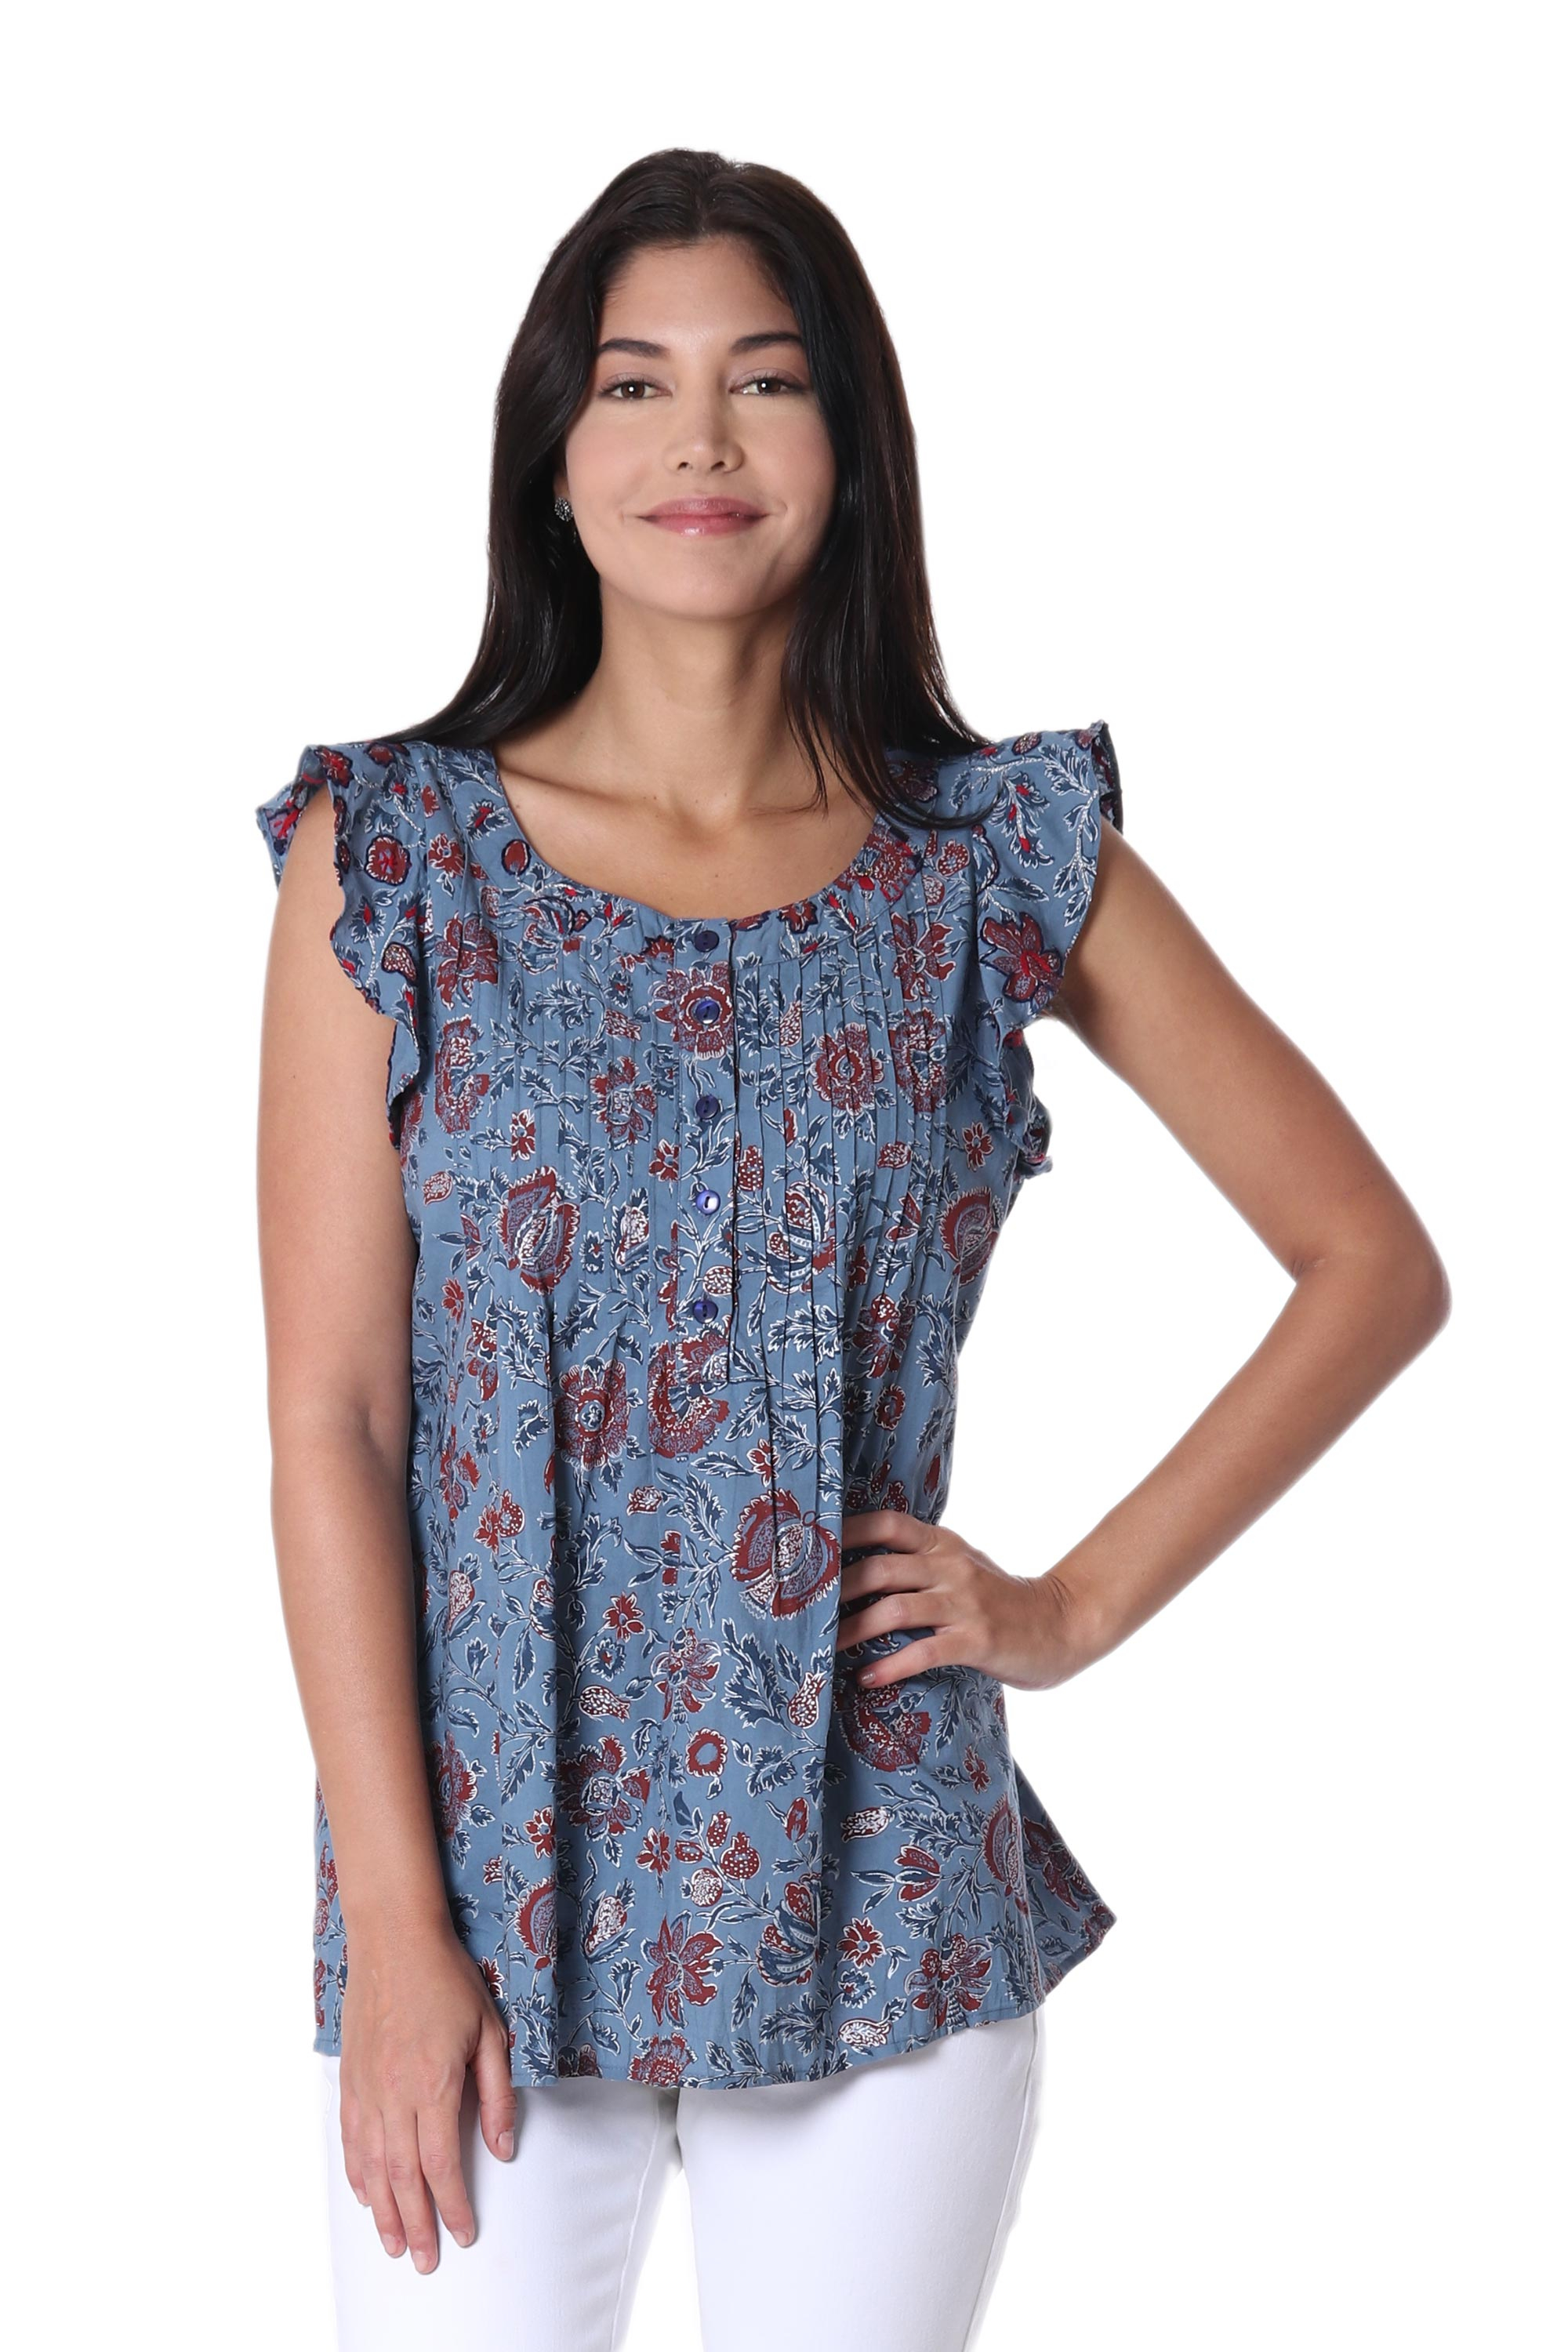 UNICEF Market | Floral Printed Cotton Blouse in Cerulean from India ...